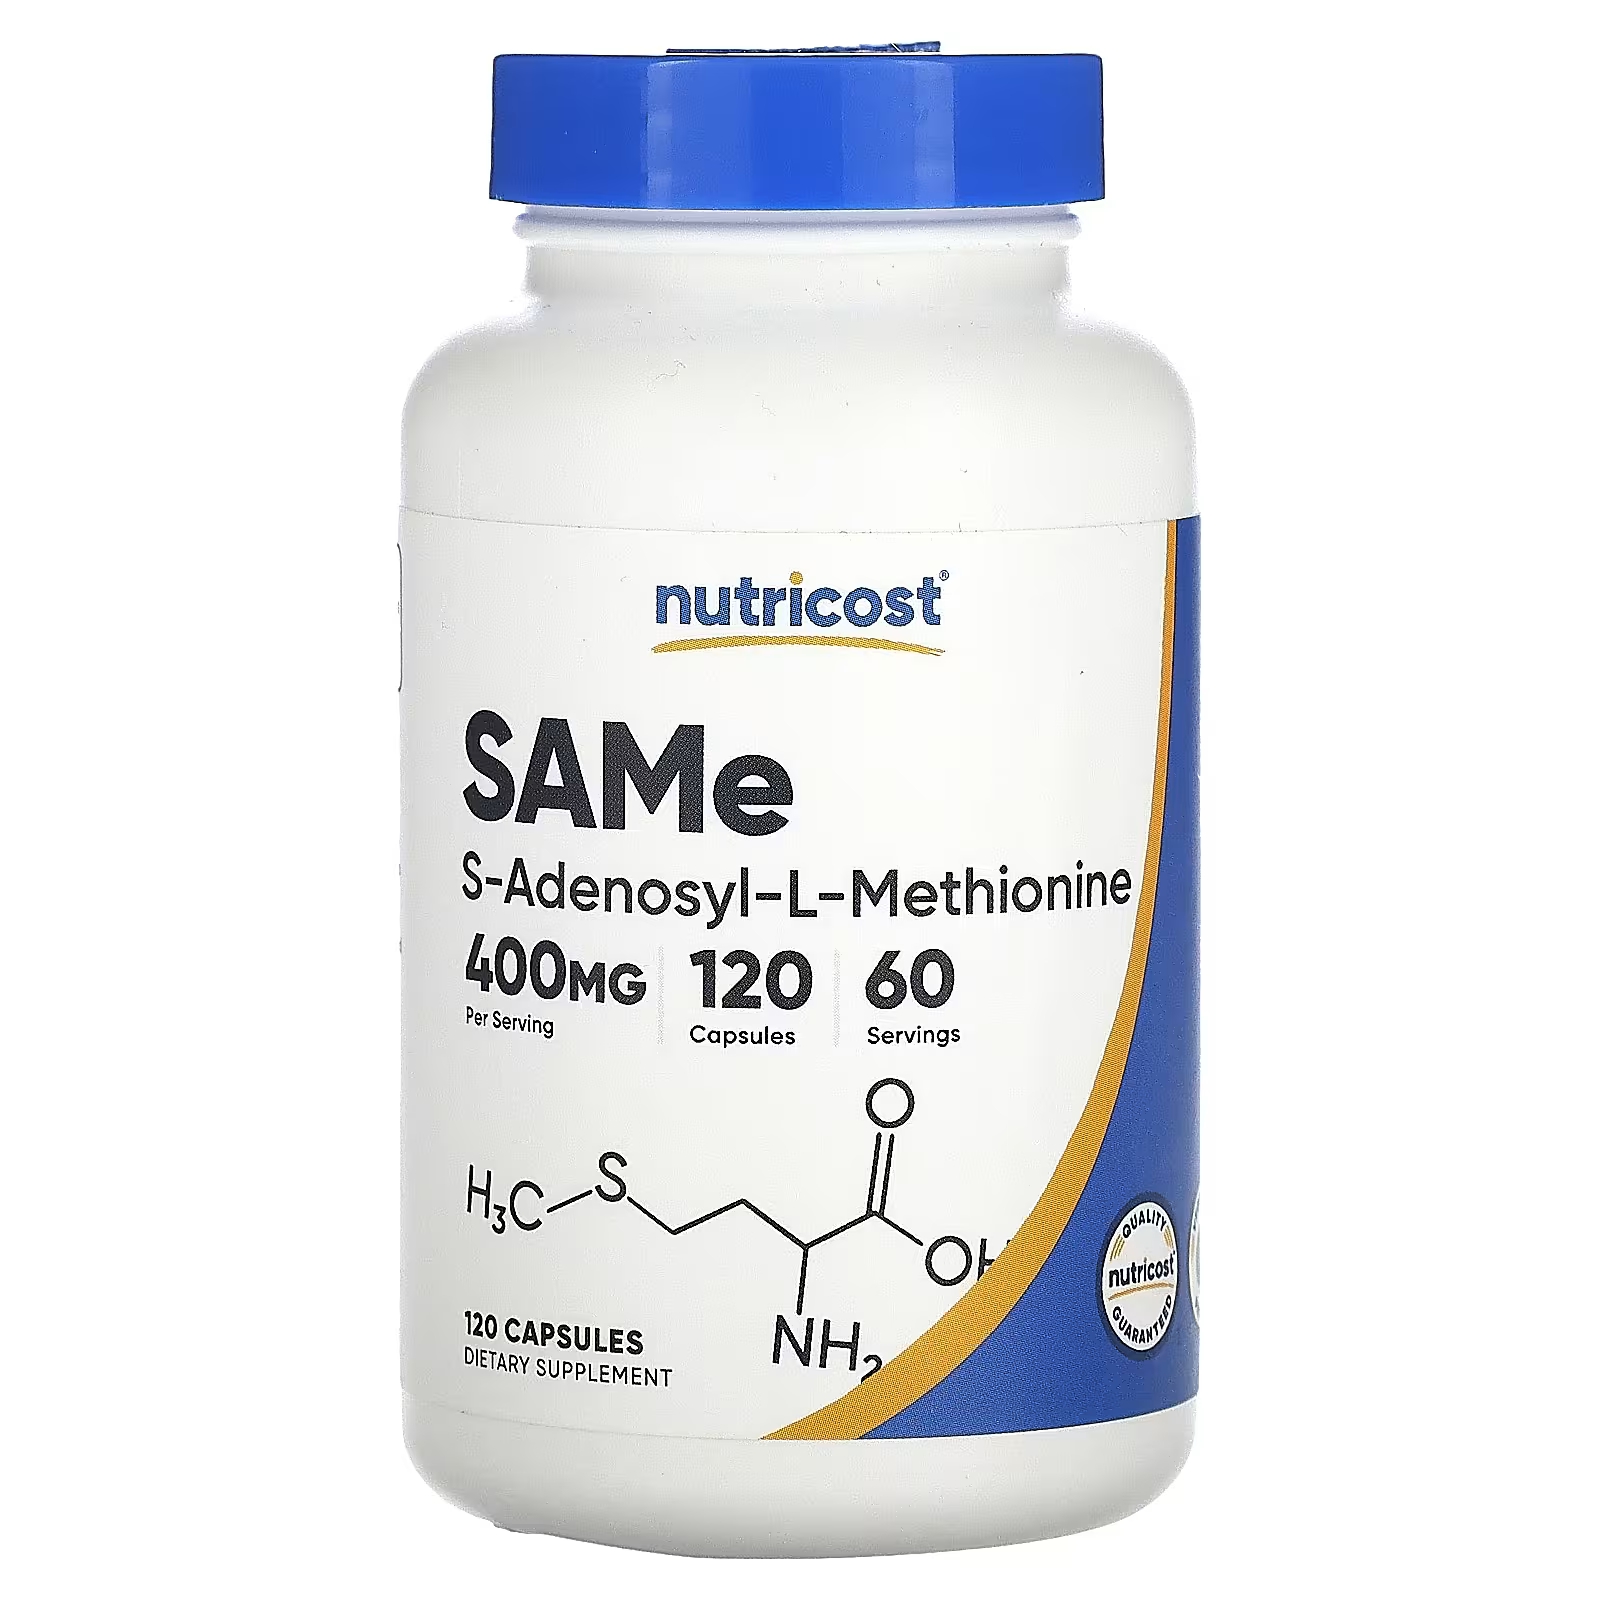 SAMe Nutricost 400 мг, 120 капсул (200 мг на капсулу) nutricost women dim 400 мг 120 капсул